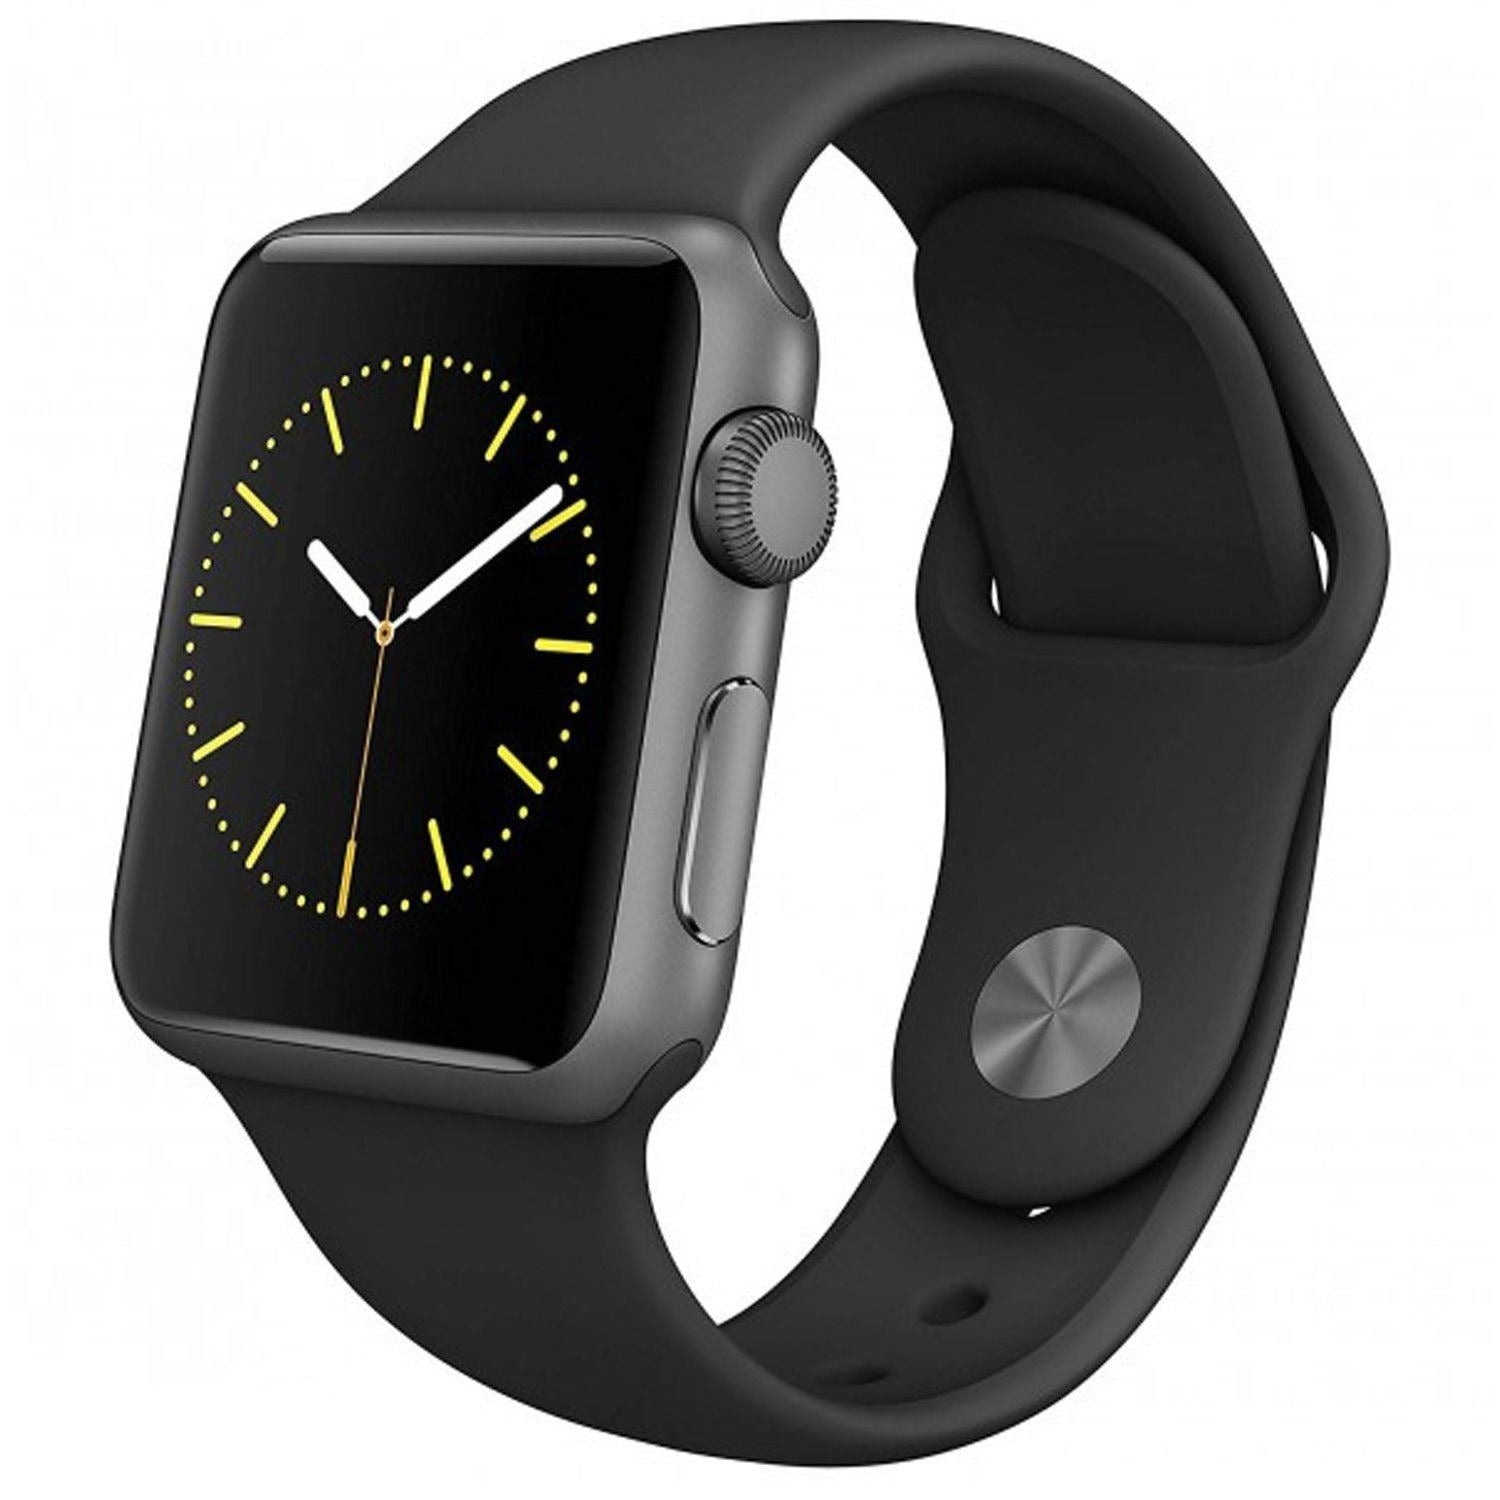 Apple Watch Smartwatch - Assorted Sizes and Colors / Black / 38mm